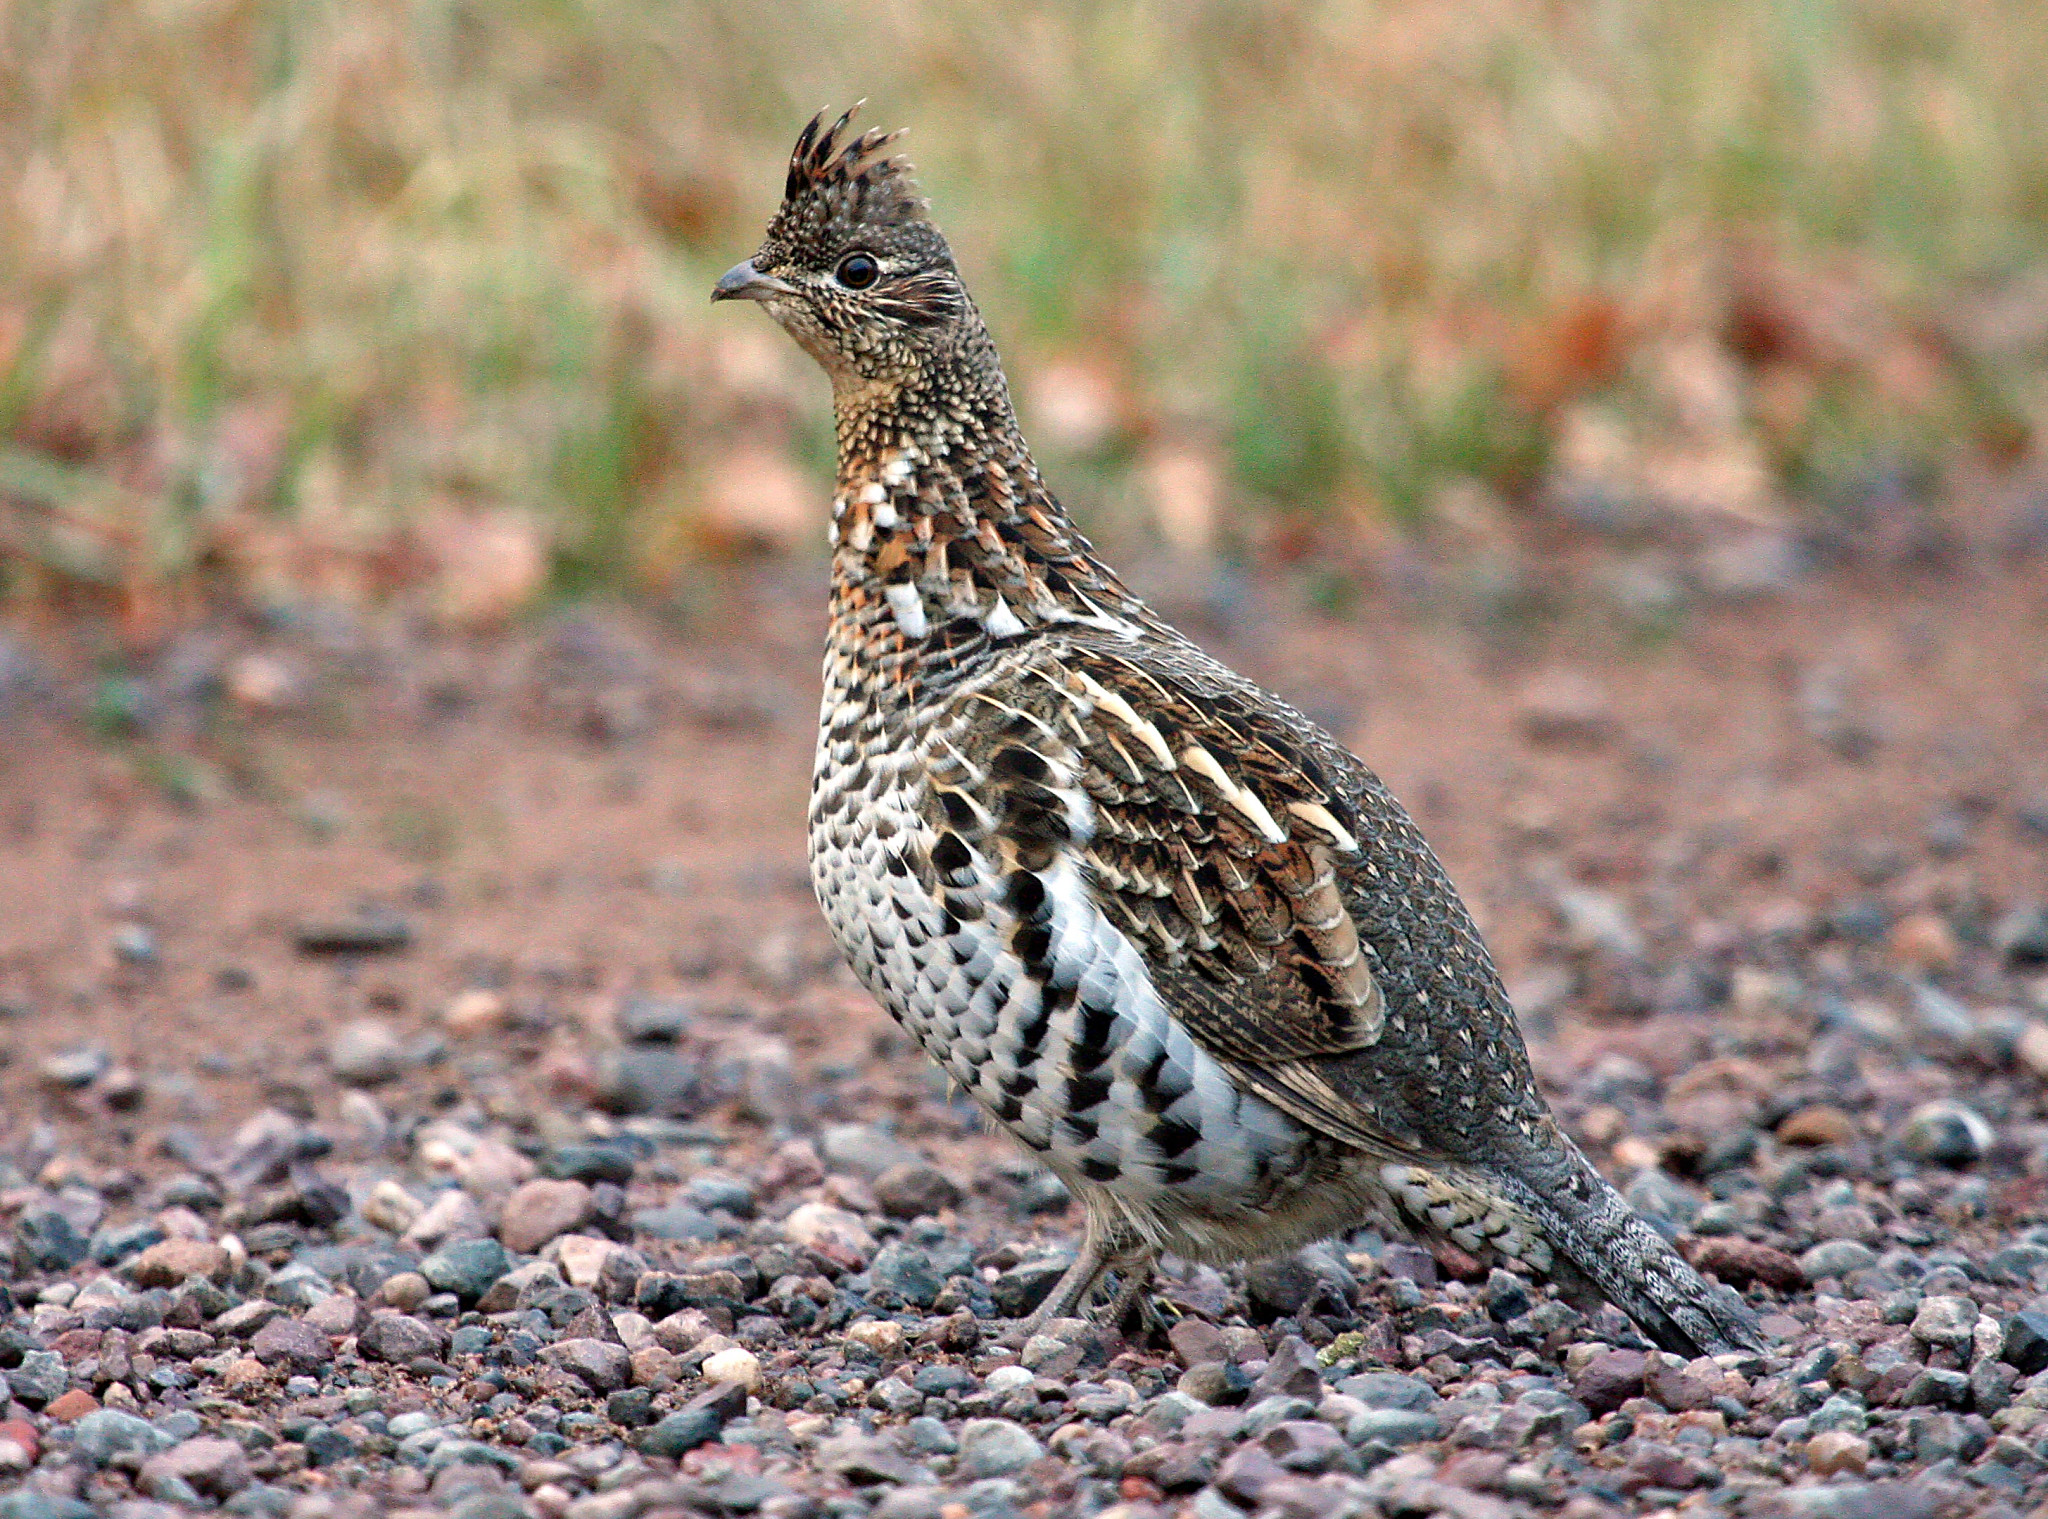 A ruffed grouse standing on pebbles in front of a field.